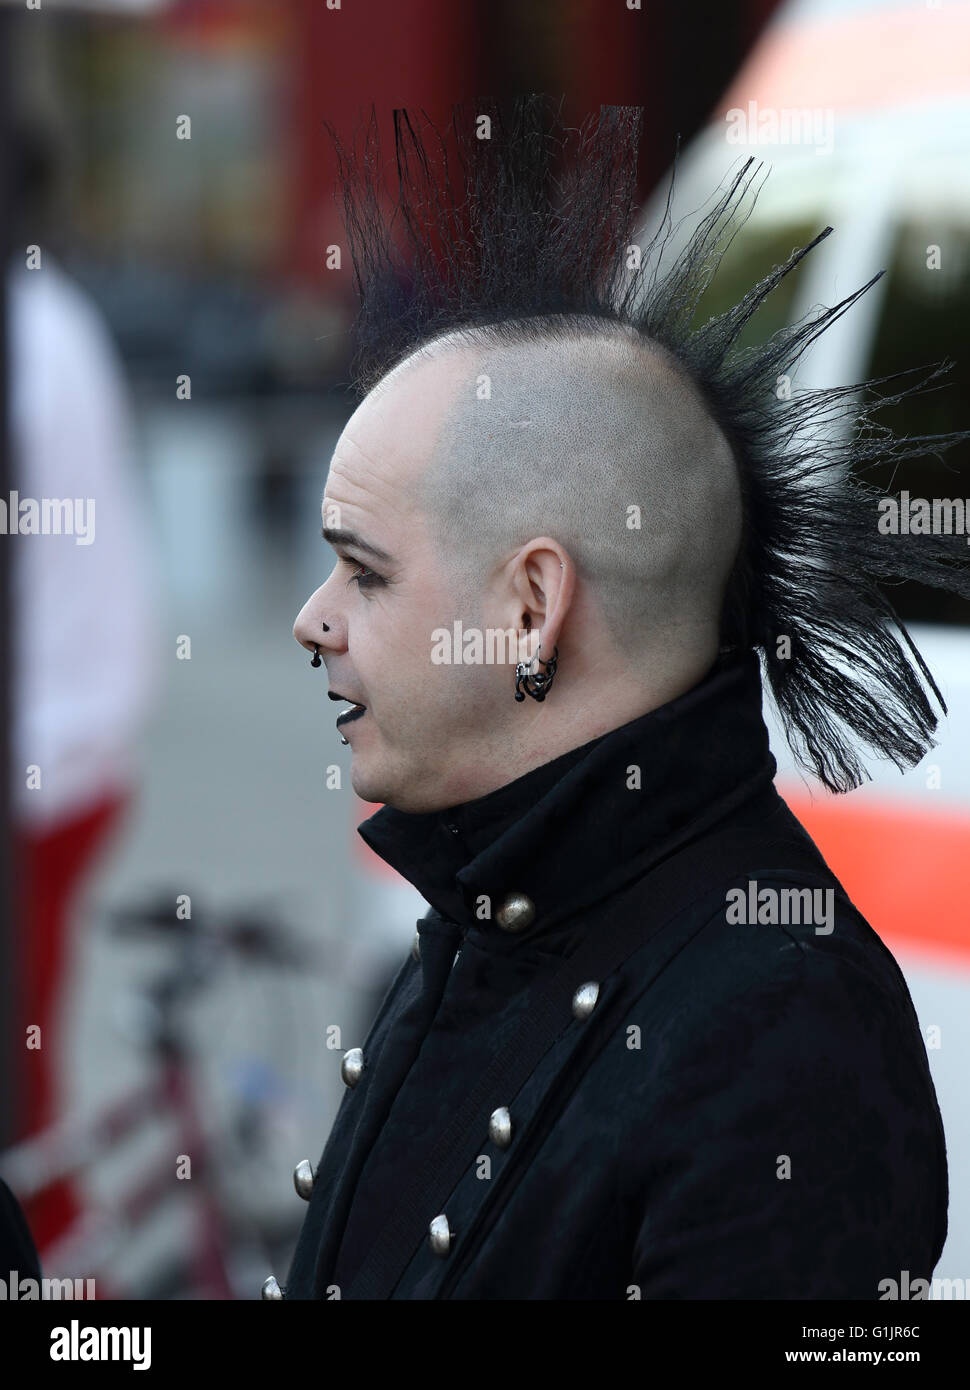 Goth Festival (Gotik-Wave-Treffen) Leipzig, Germany, 13th - 15th May 2016. Man with spiky punk hair style and piercings Stock Photo